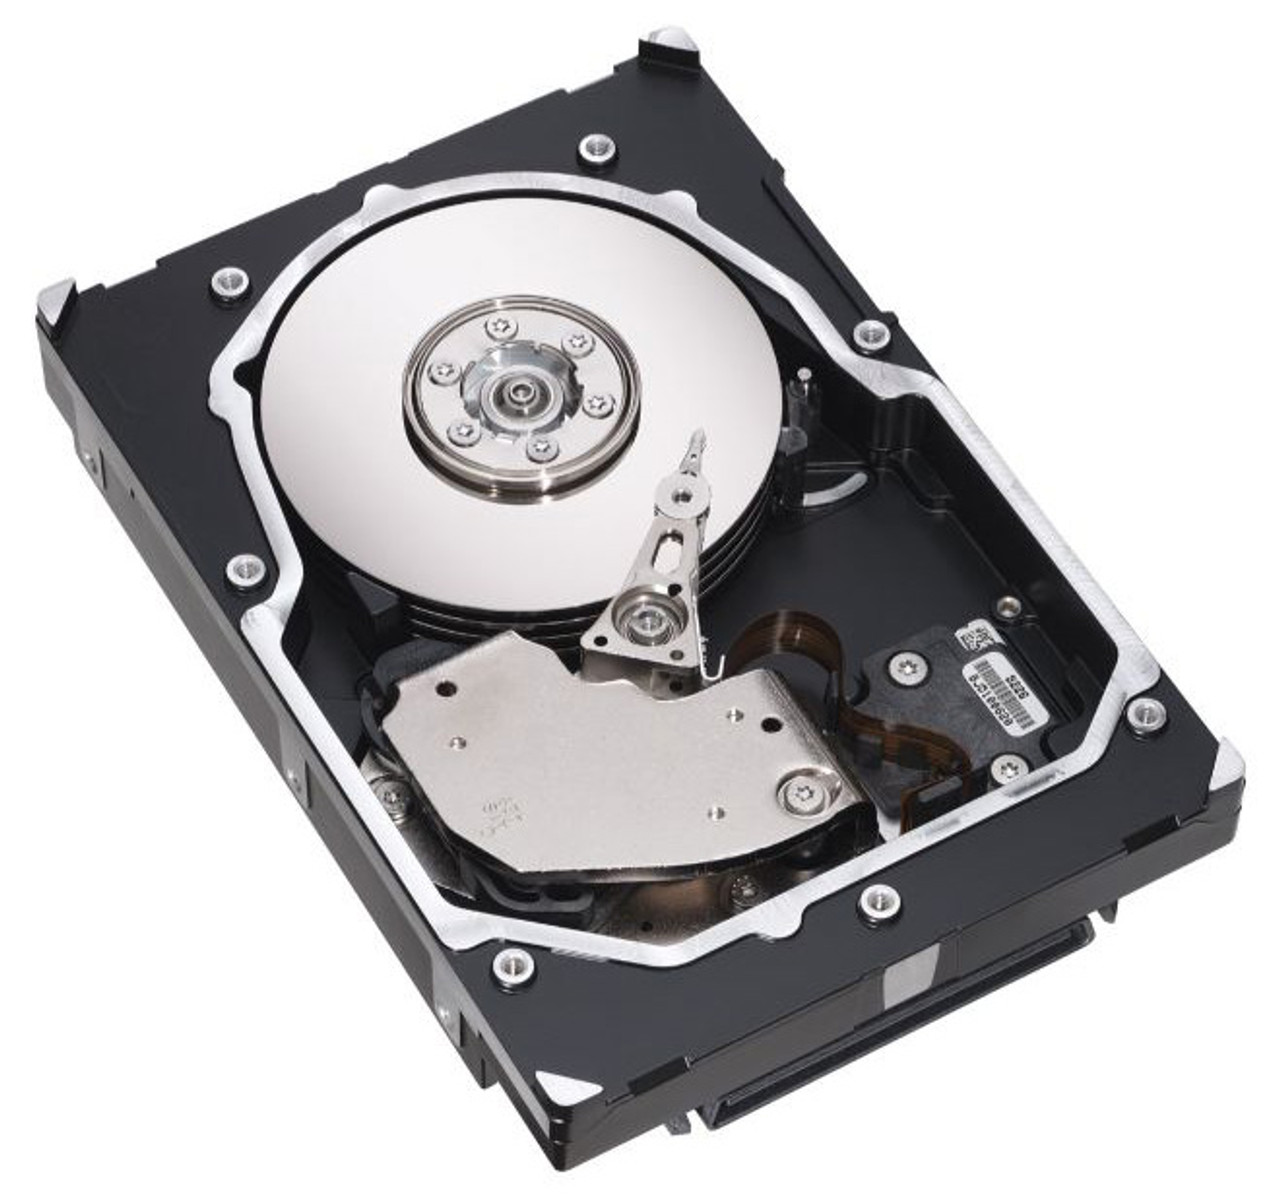 108-00032 NetApp 144GB 10000RPM Fibre Channel 2Gbps 8MB Cache 3.5-inch Internal Hard Drive for C1300